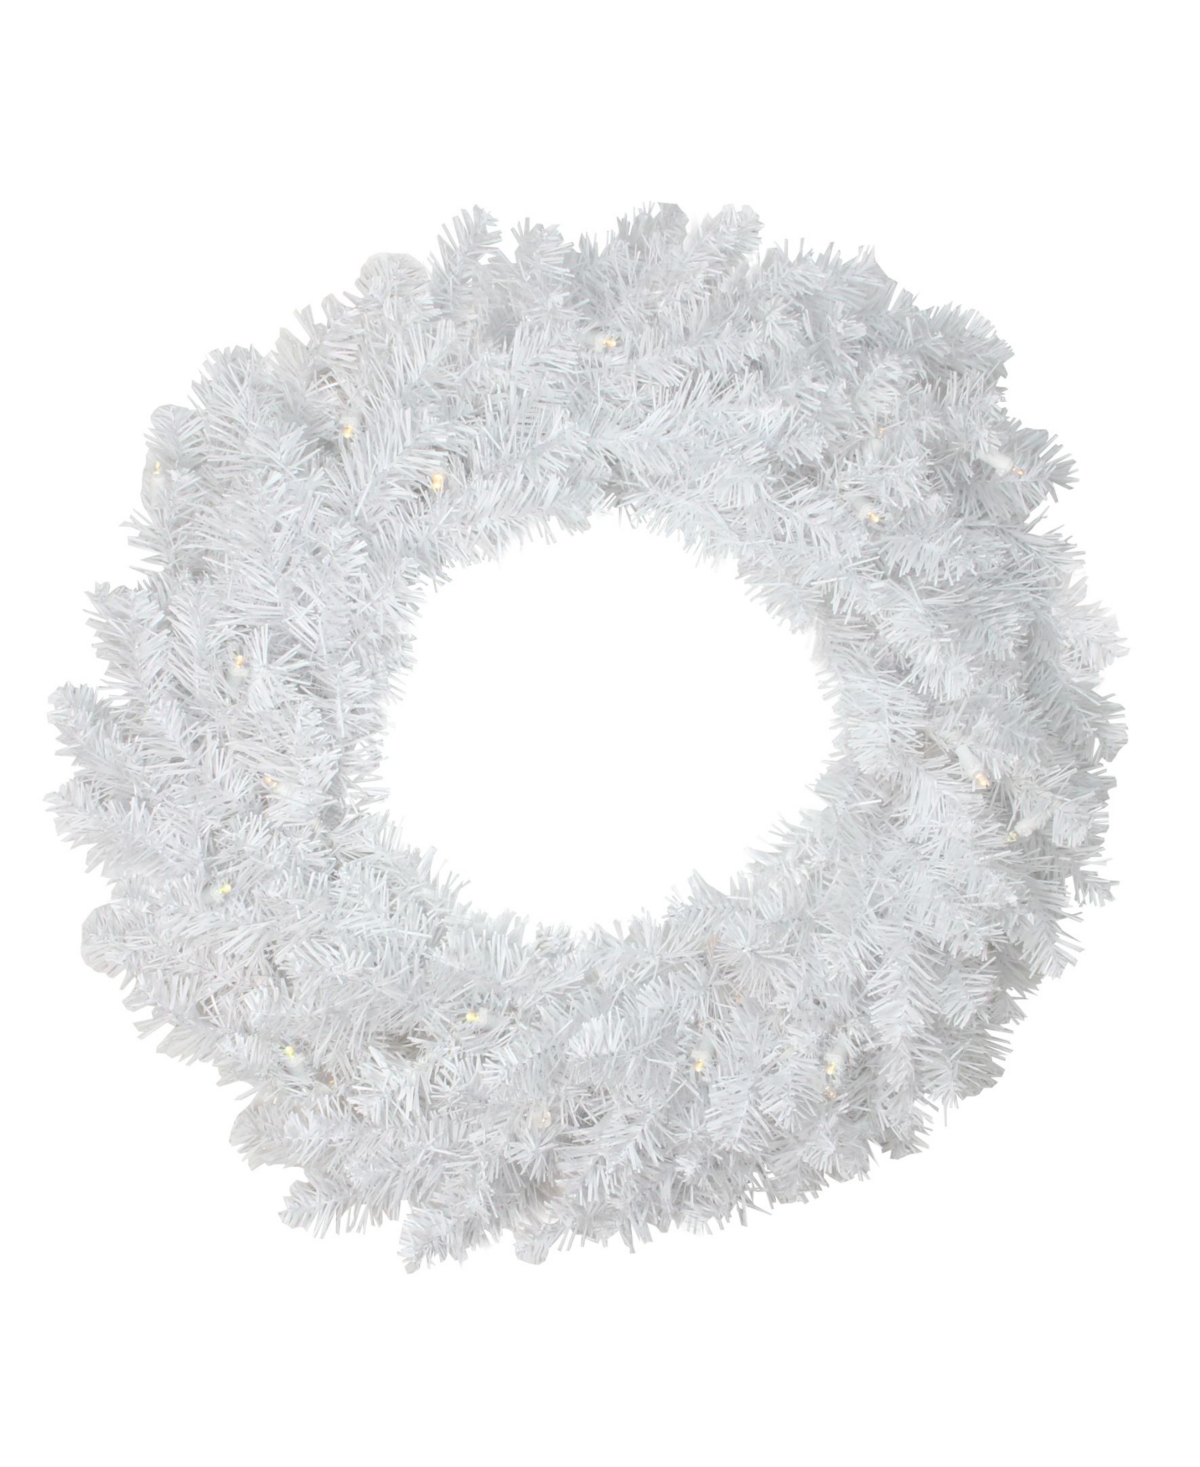 24" Pre-Lit Led White Pine Artificial Christmas Wreath - Clear Lights - White